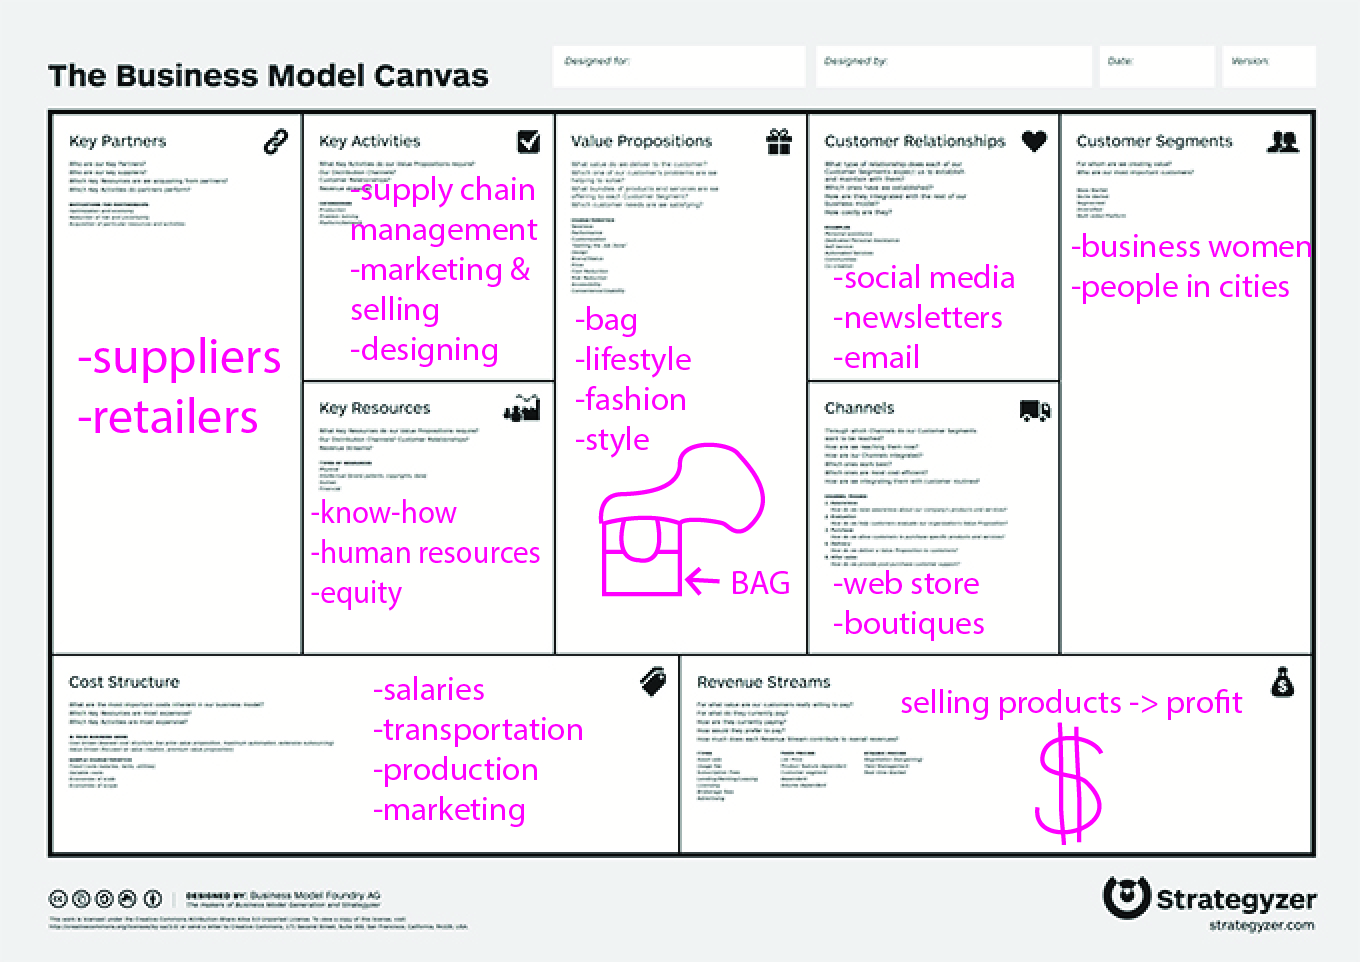 2) Business Model Canvas - Global Fashion Business